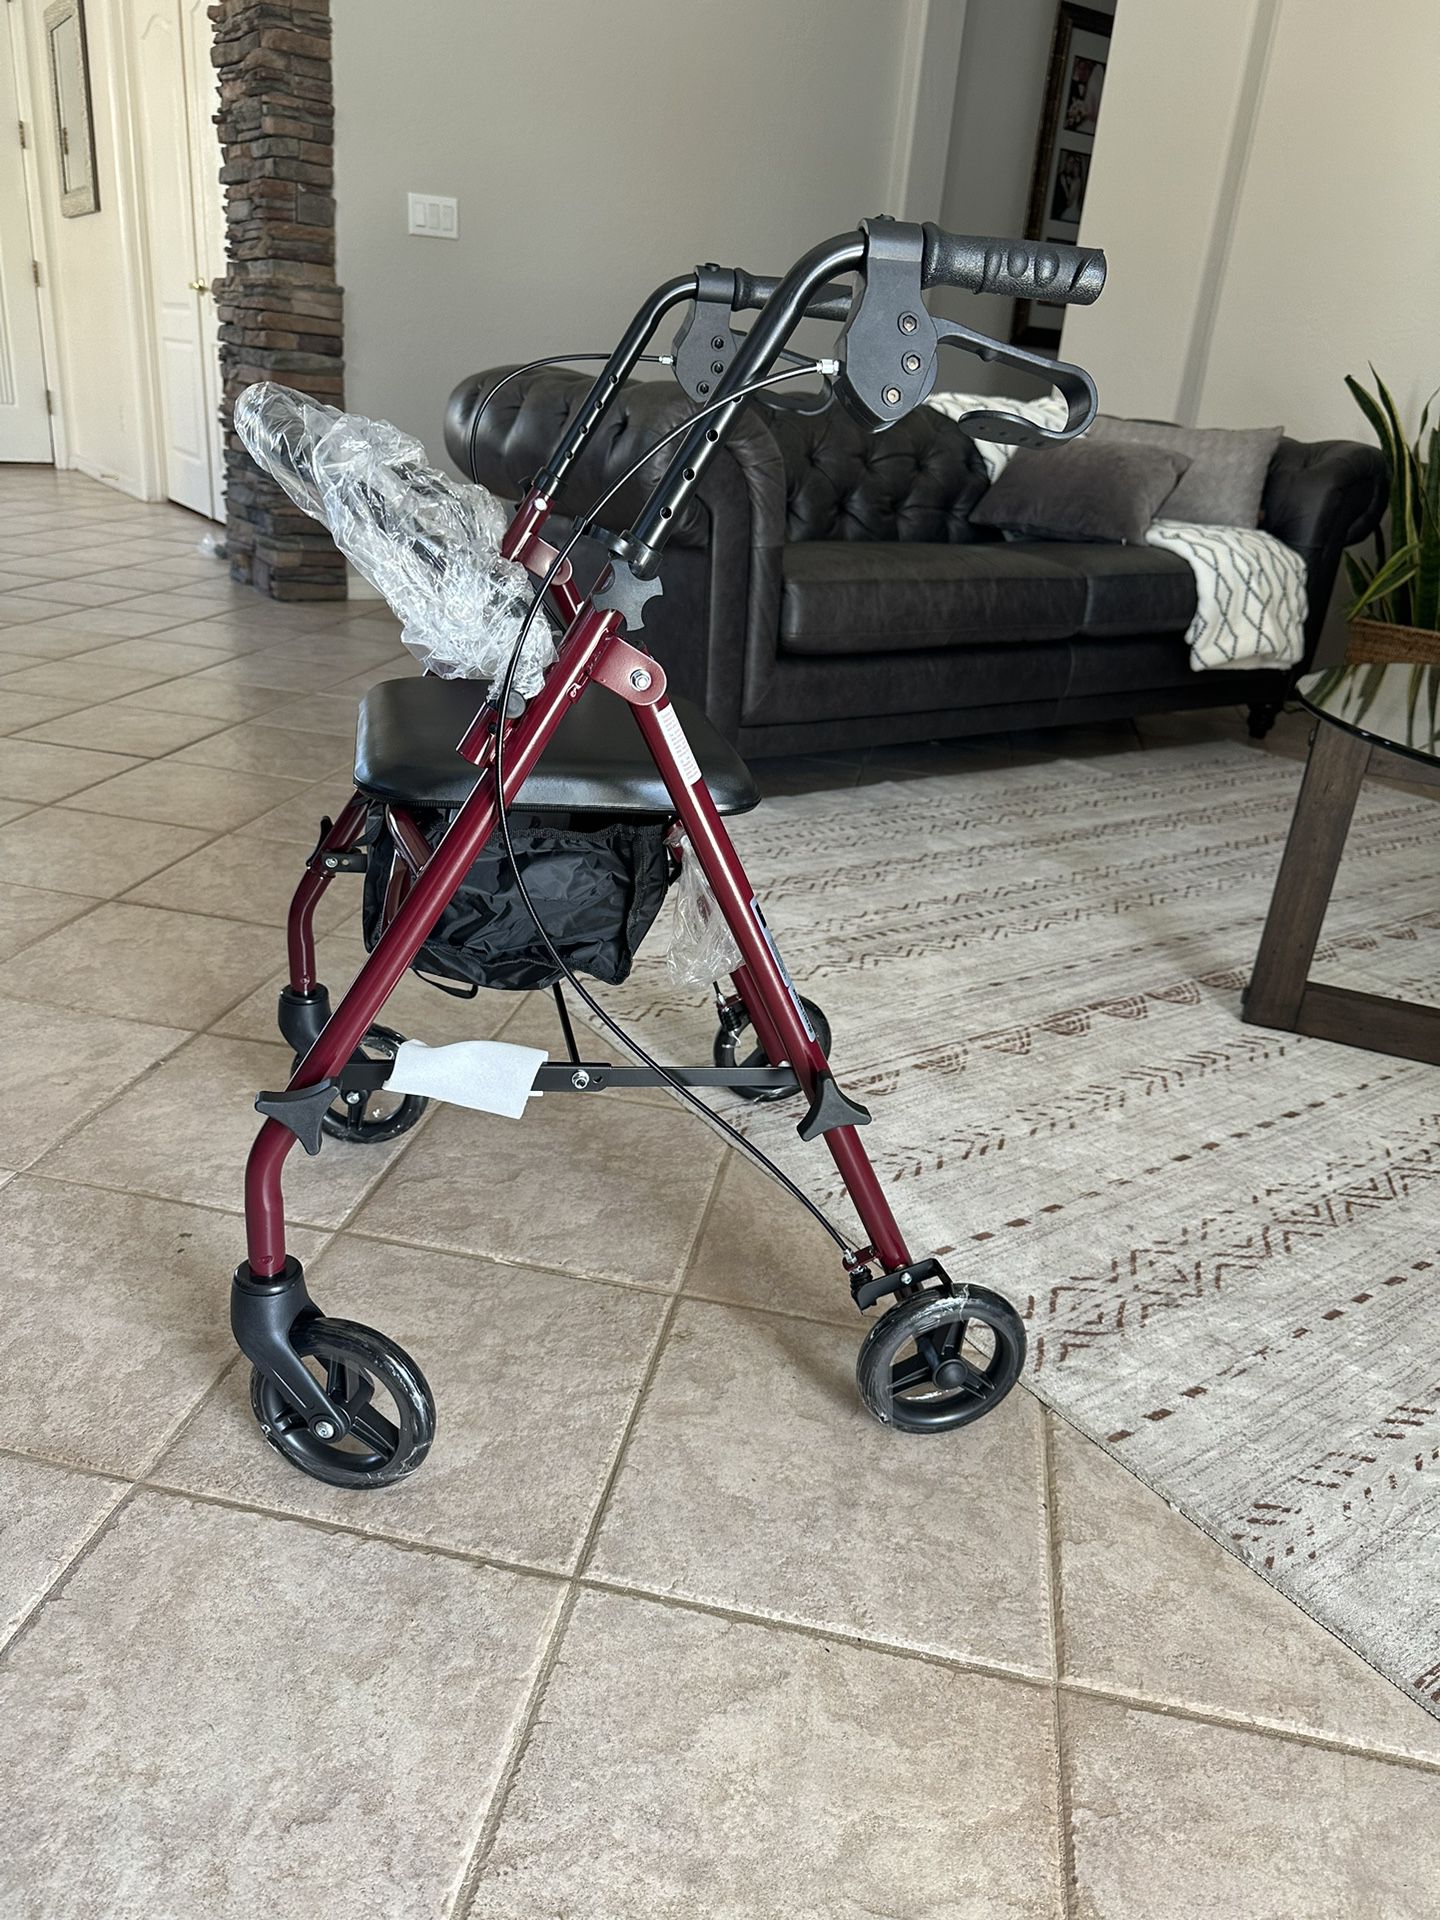 Walker Rollator Brand New / Supports Up To 350lbs / Easy To Maneuver 